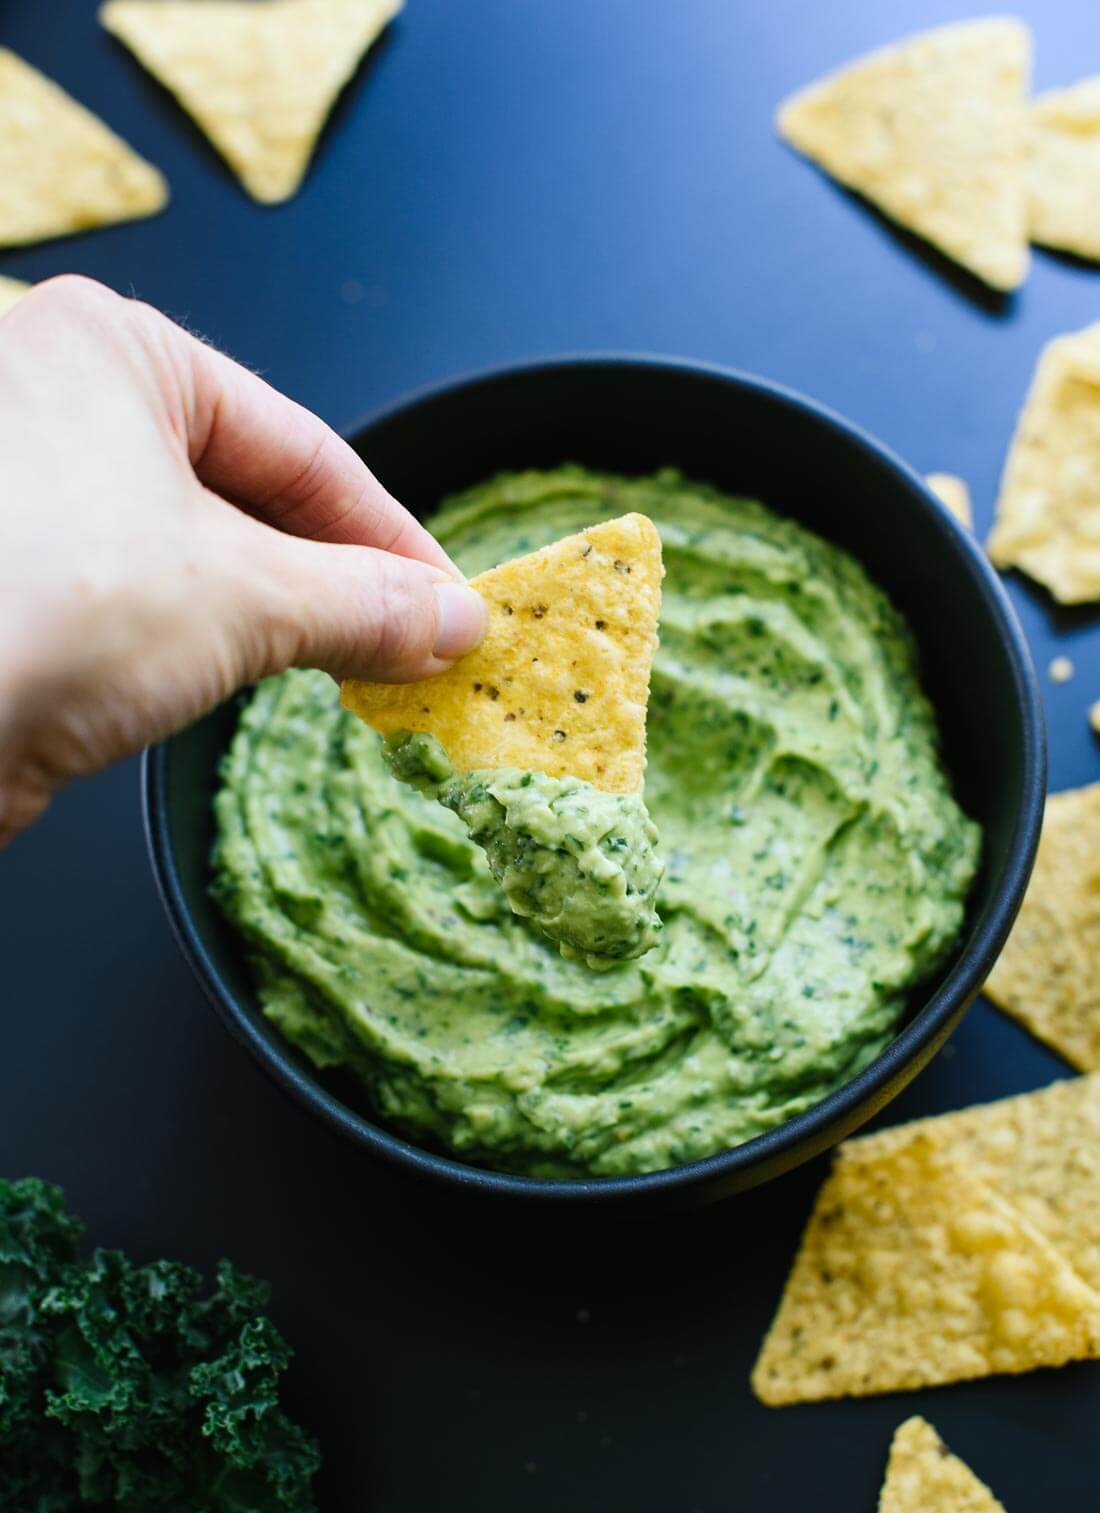 Kale guacamole tastes amazing and has an extra boost of nutrition! cookieandkate.com